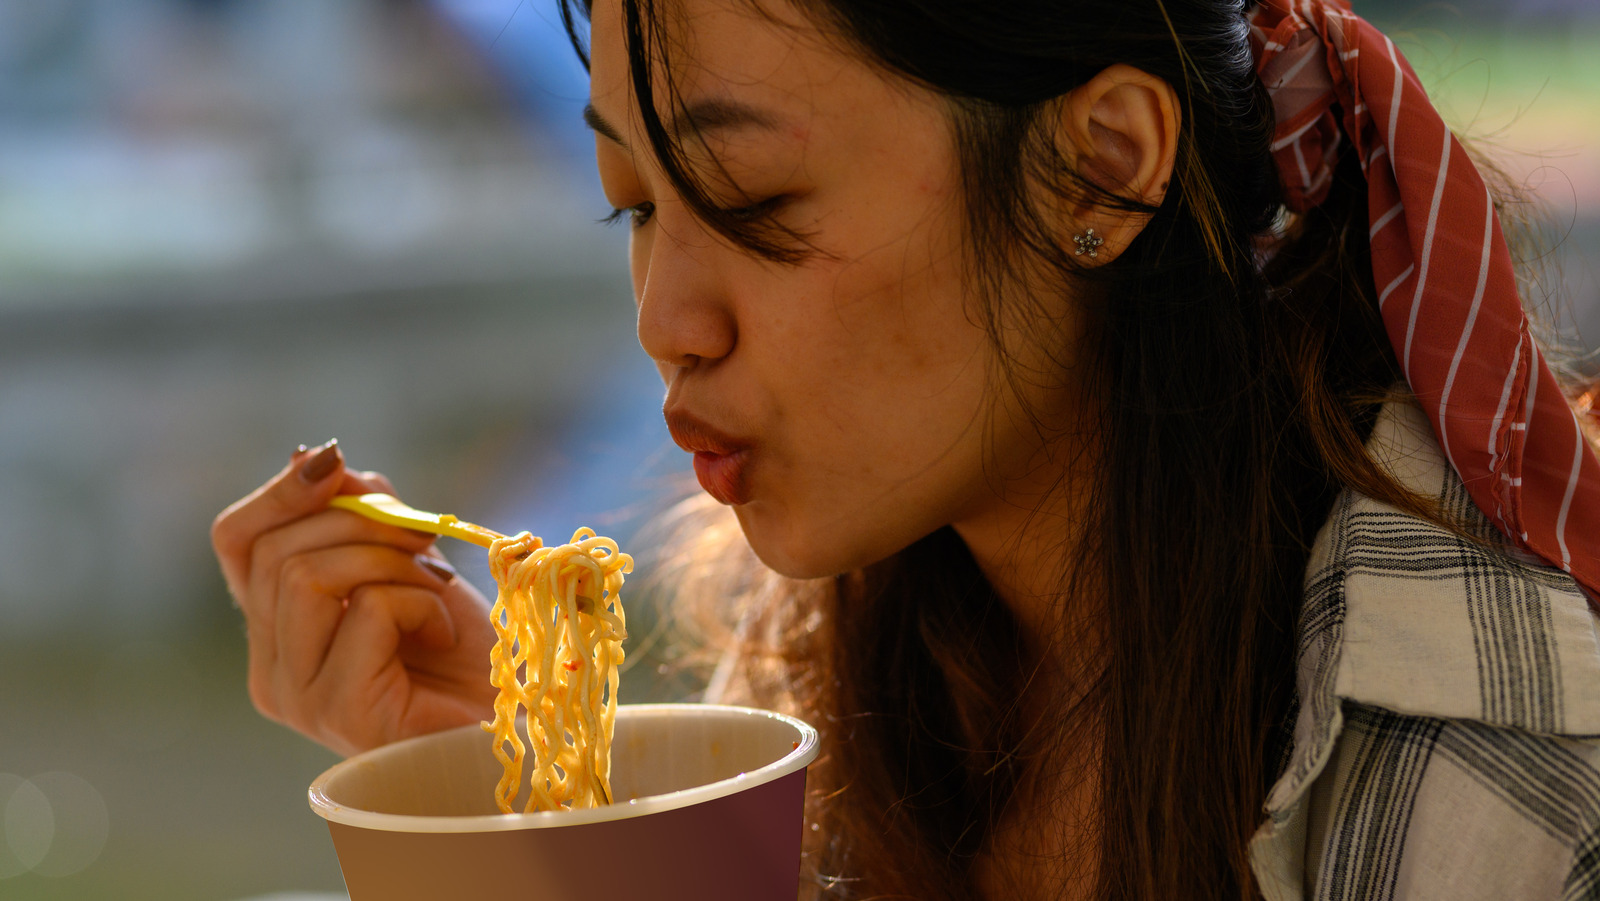 Eating Instant Ramen Has An Unexpected Effect On Your Eyes